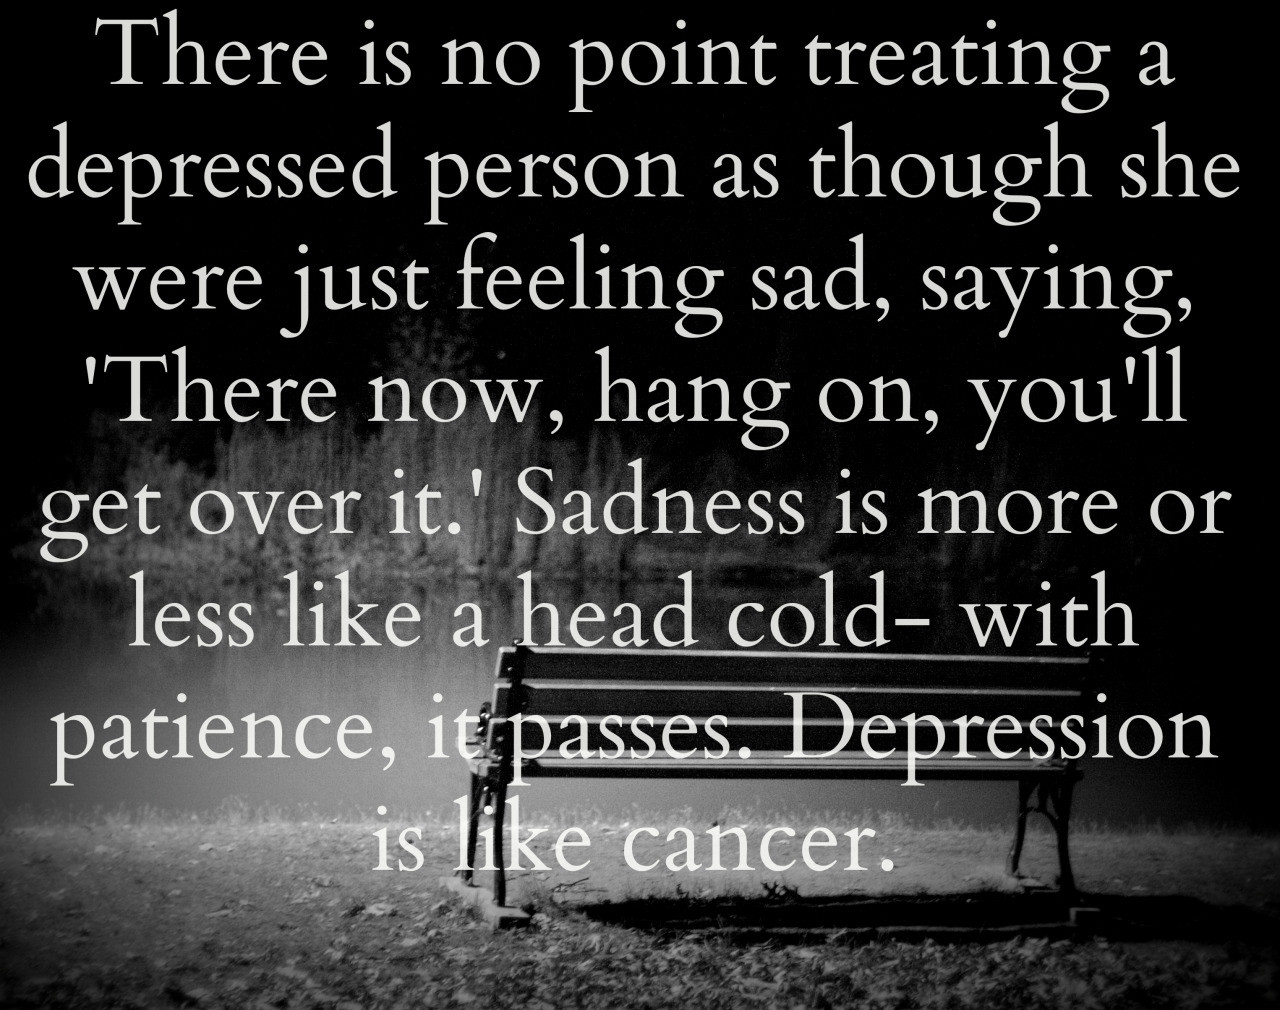 Quotes For Sad People
 Life As a Teen depression quotes